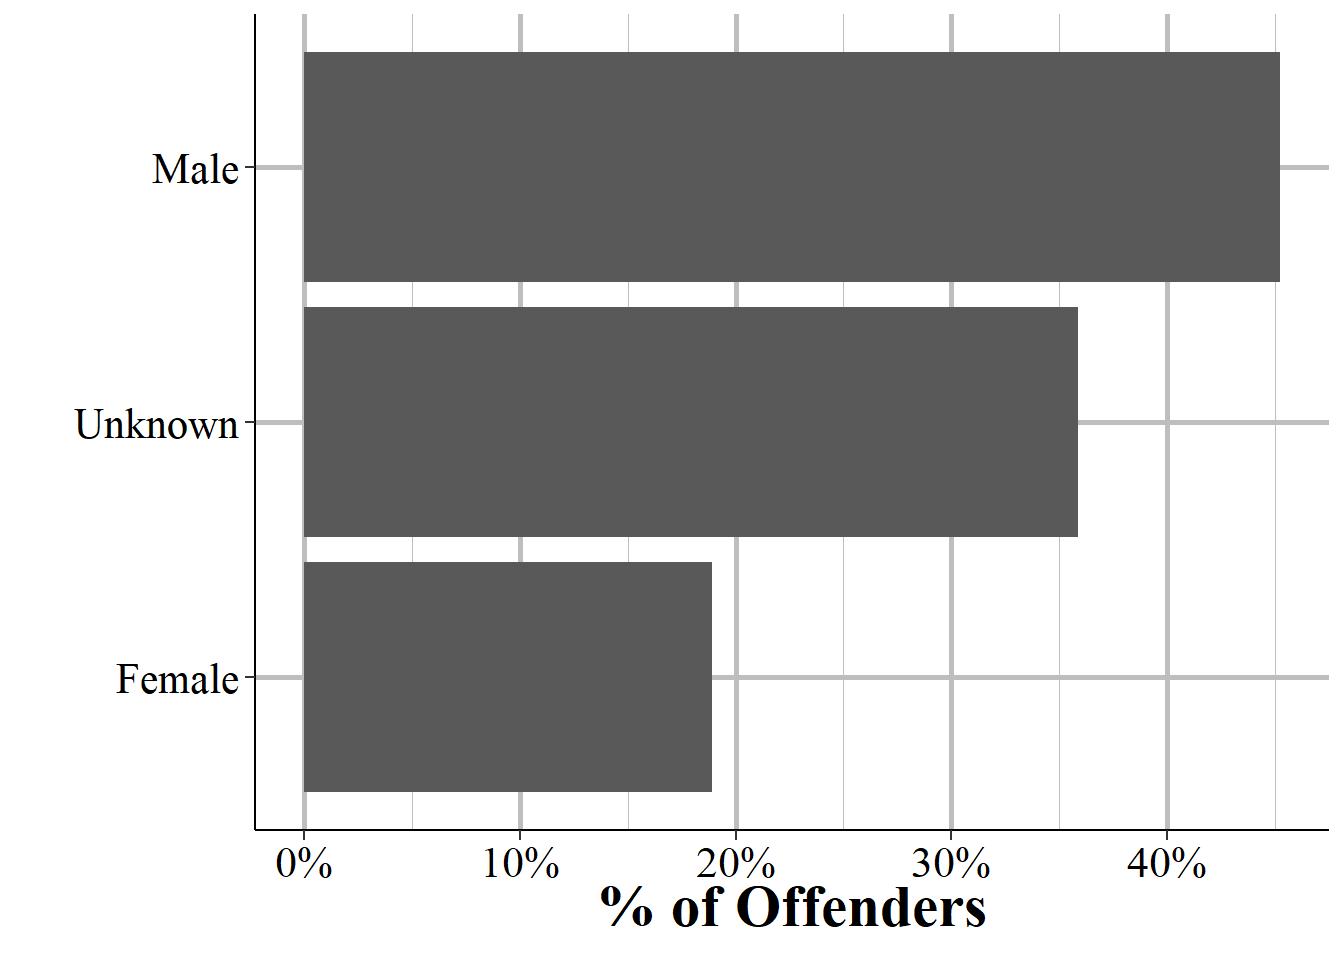 The sex of all offenders reported in the 2019 NIBRS data.